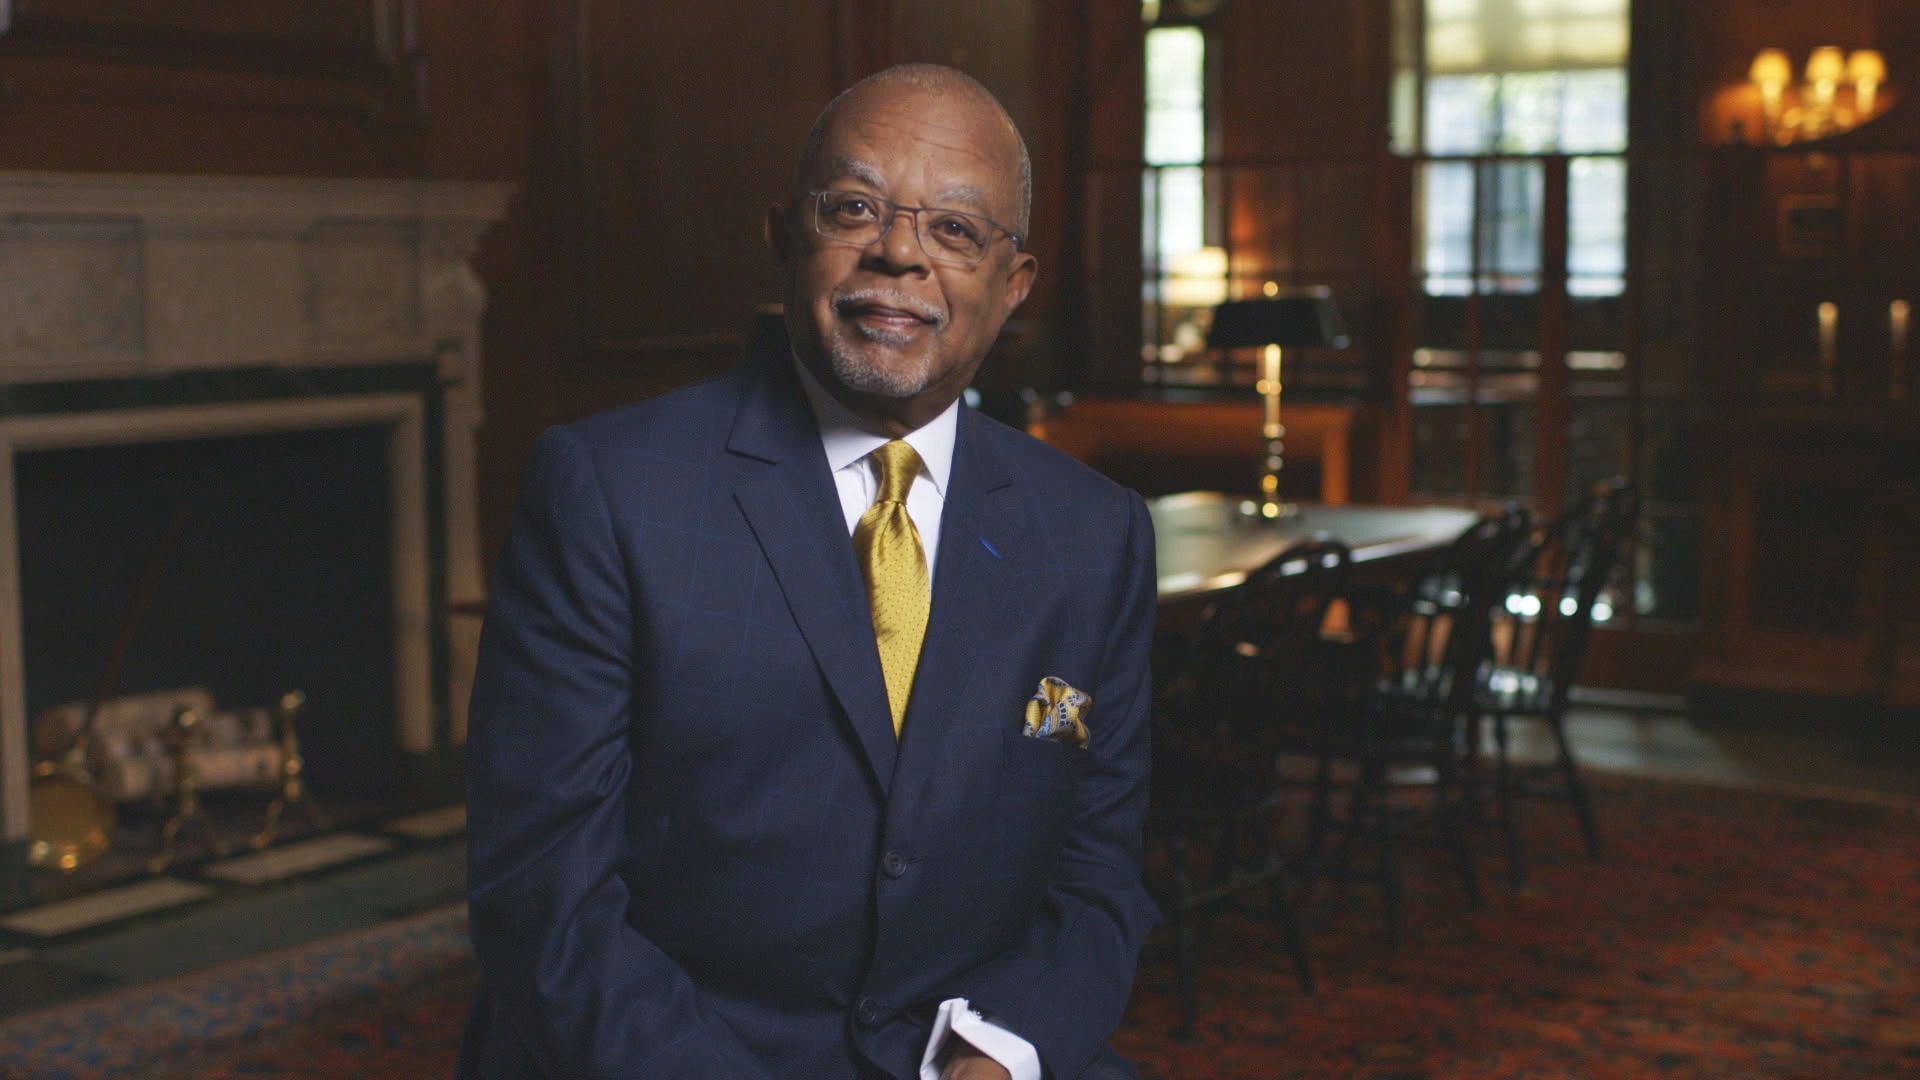 Finding Your Roots - Season 7 Watch in Best Quality for Free on Fmovies